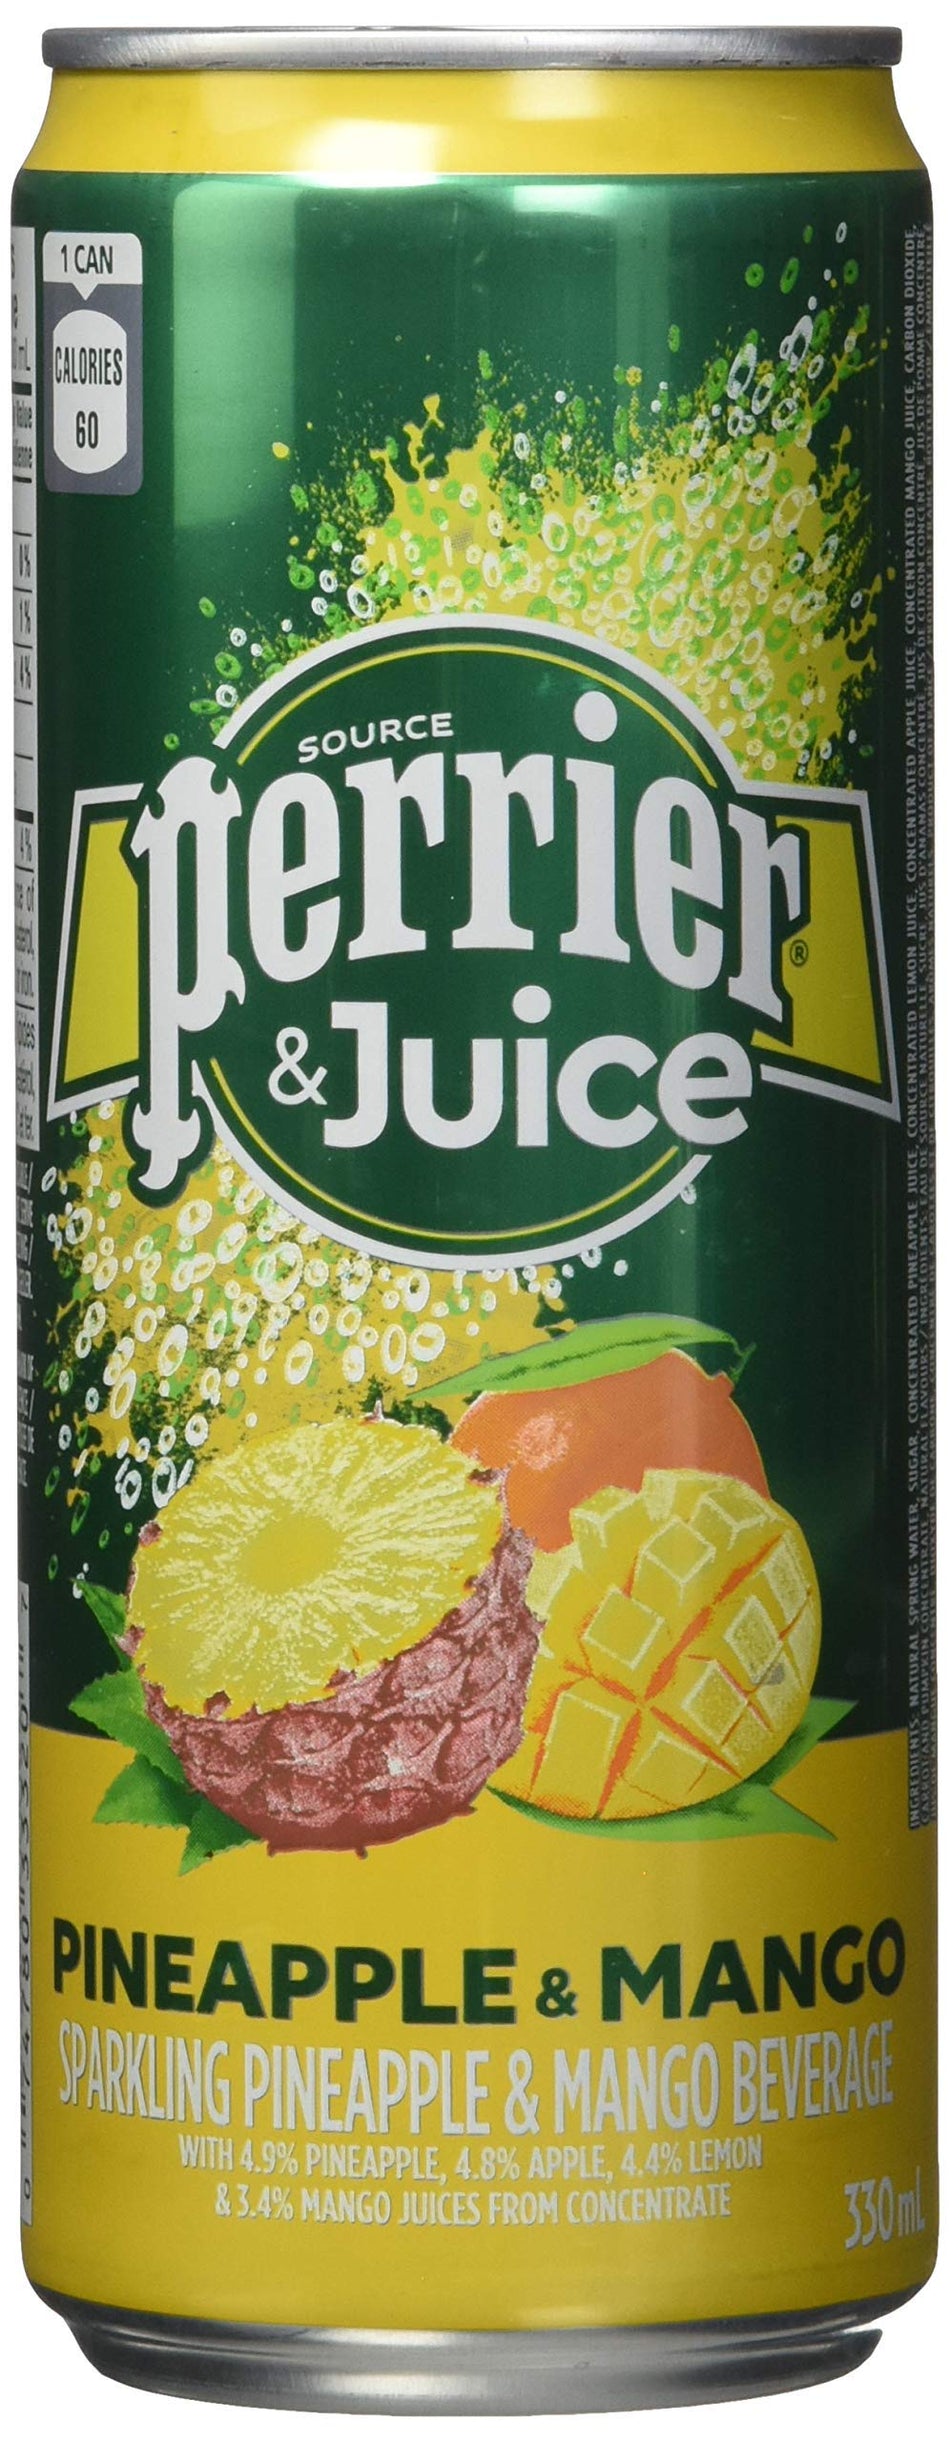 Juice Sparkling Pineapple & Mango Beverage, 330mL can, 24 Count(2-Pack)